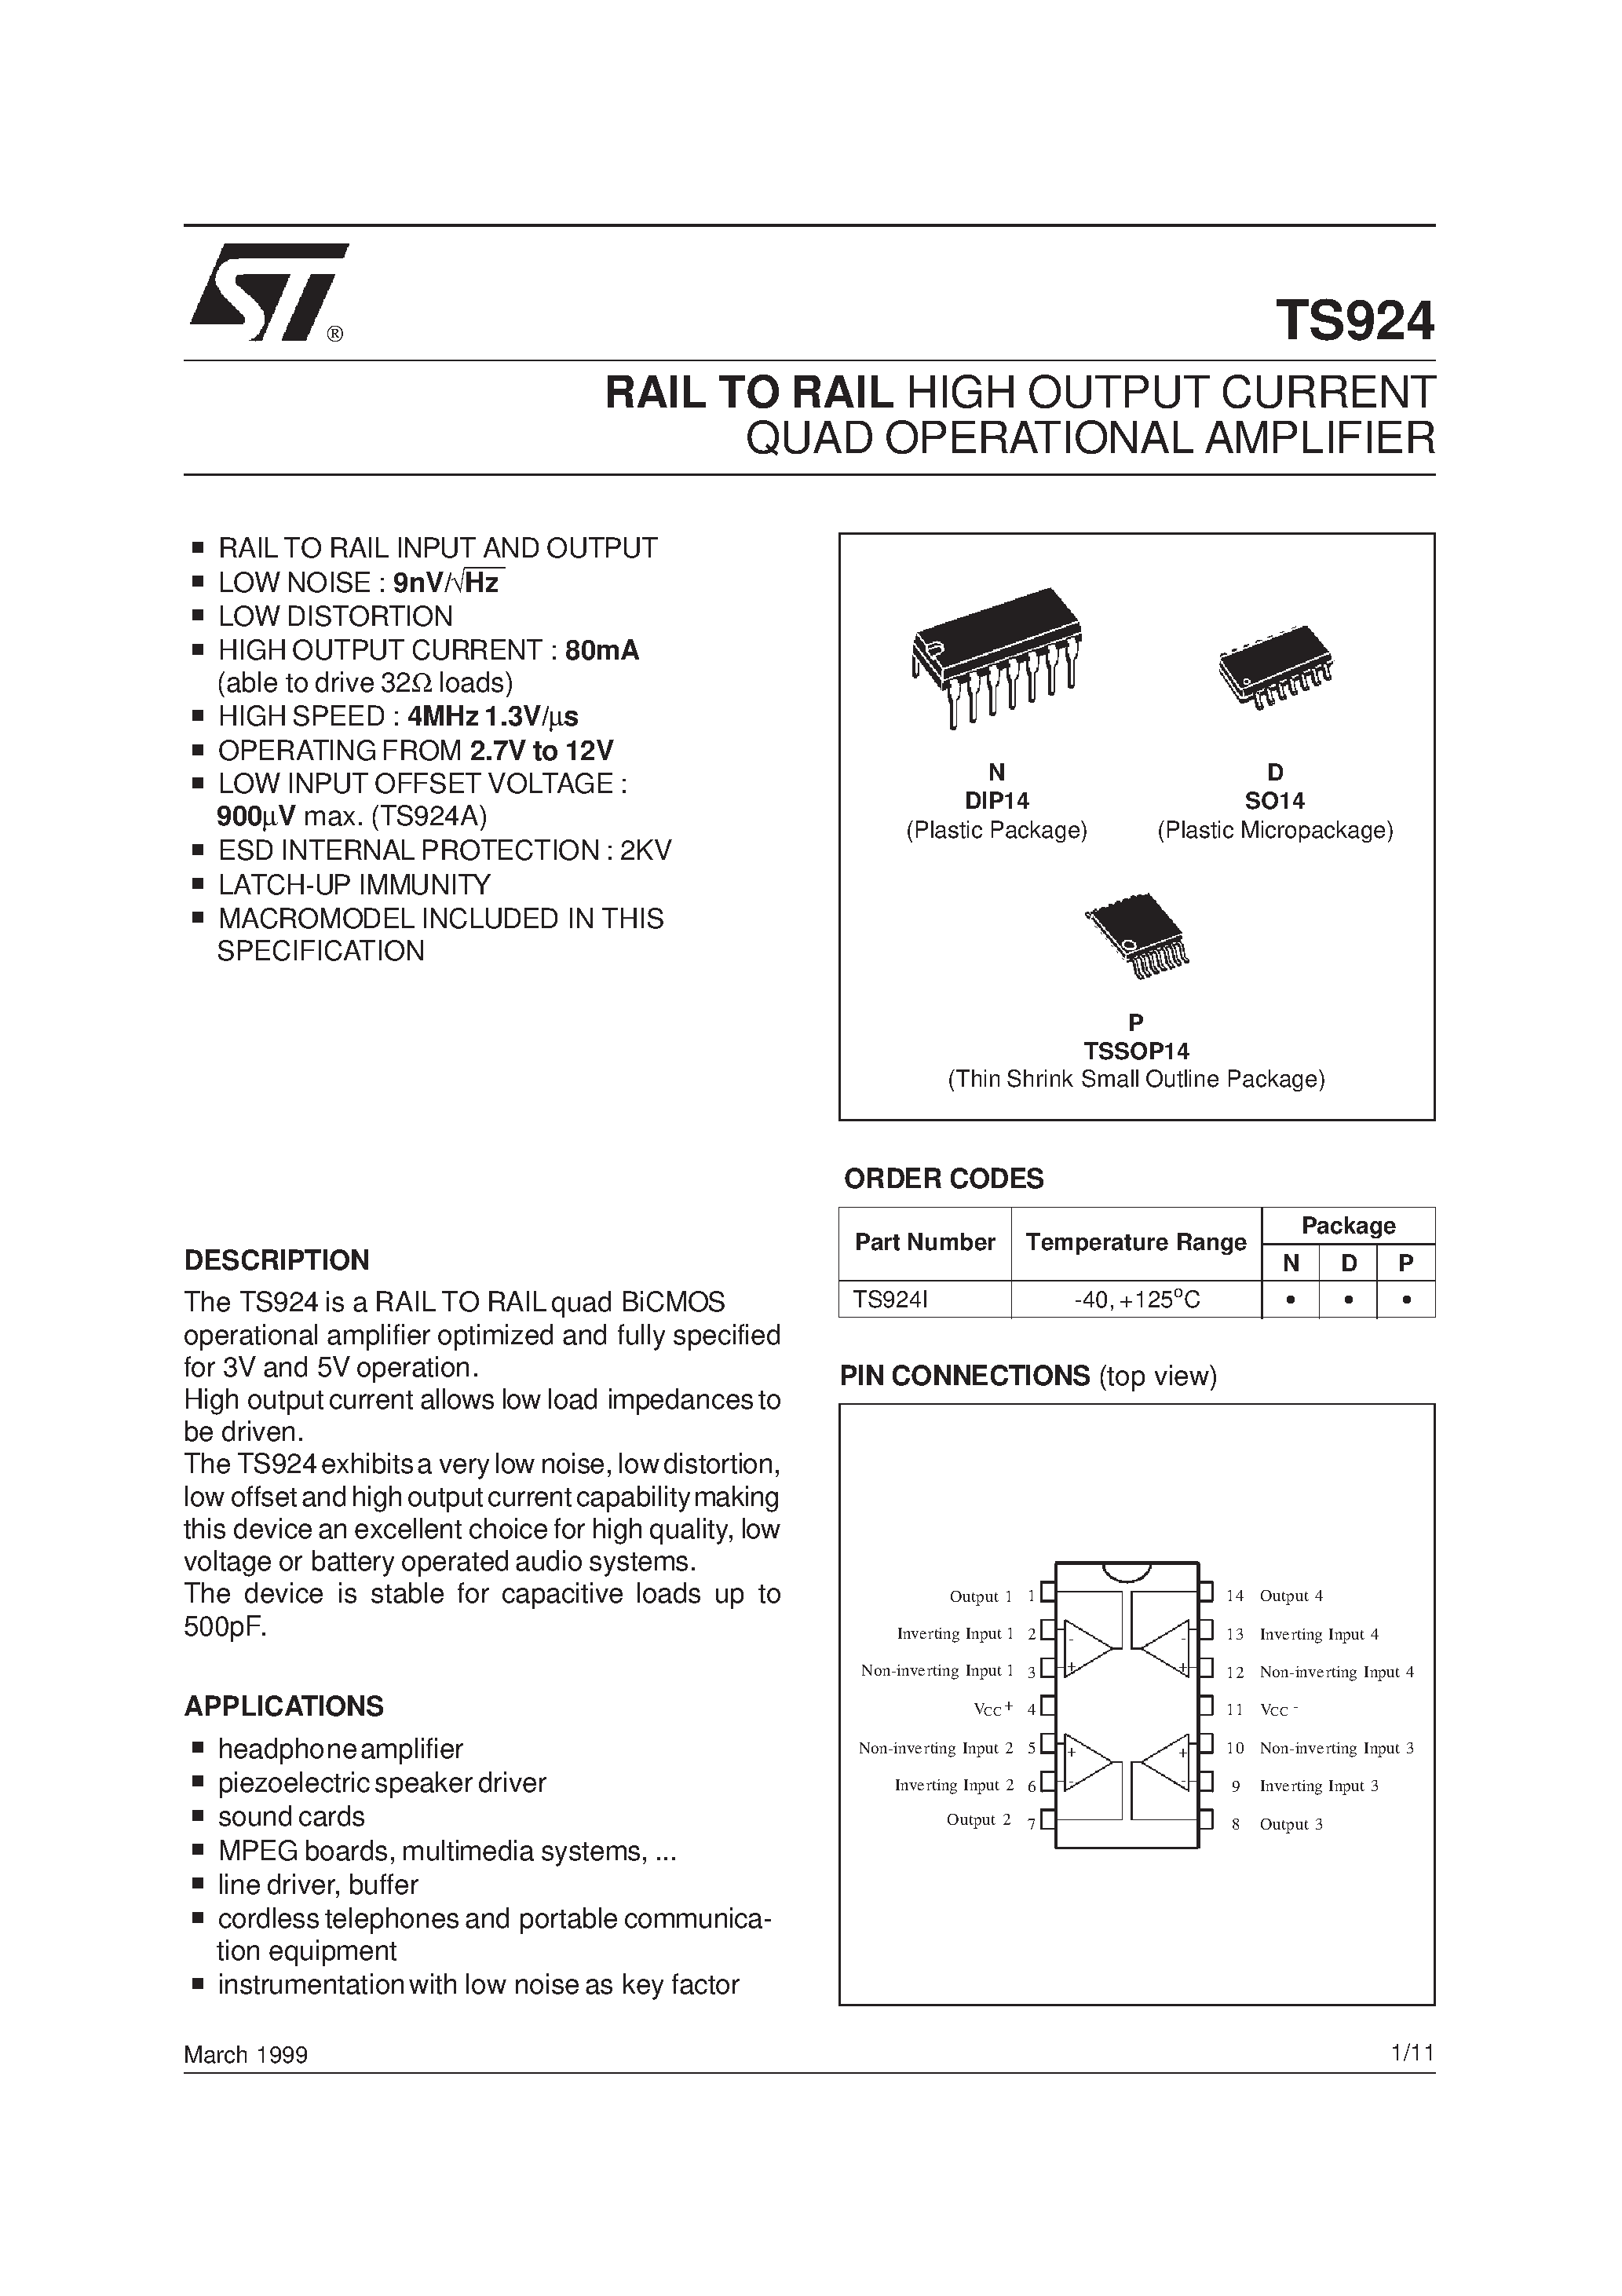 Datasheet TS924 - RAIL TO RAIL HIGH OUTPUT CURRENT QUAD OPERATIONAL AMPLIFIER page 1